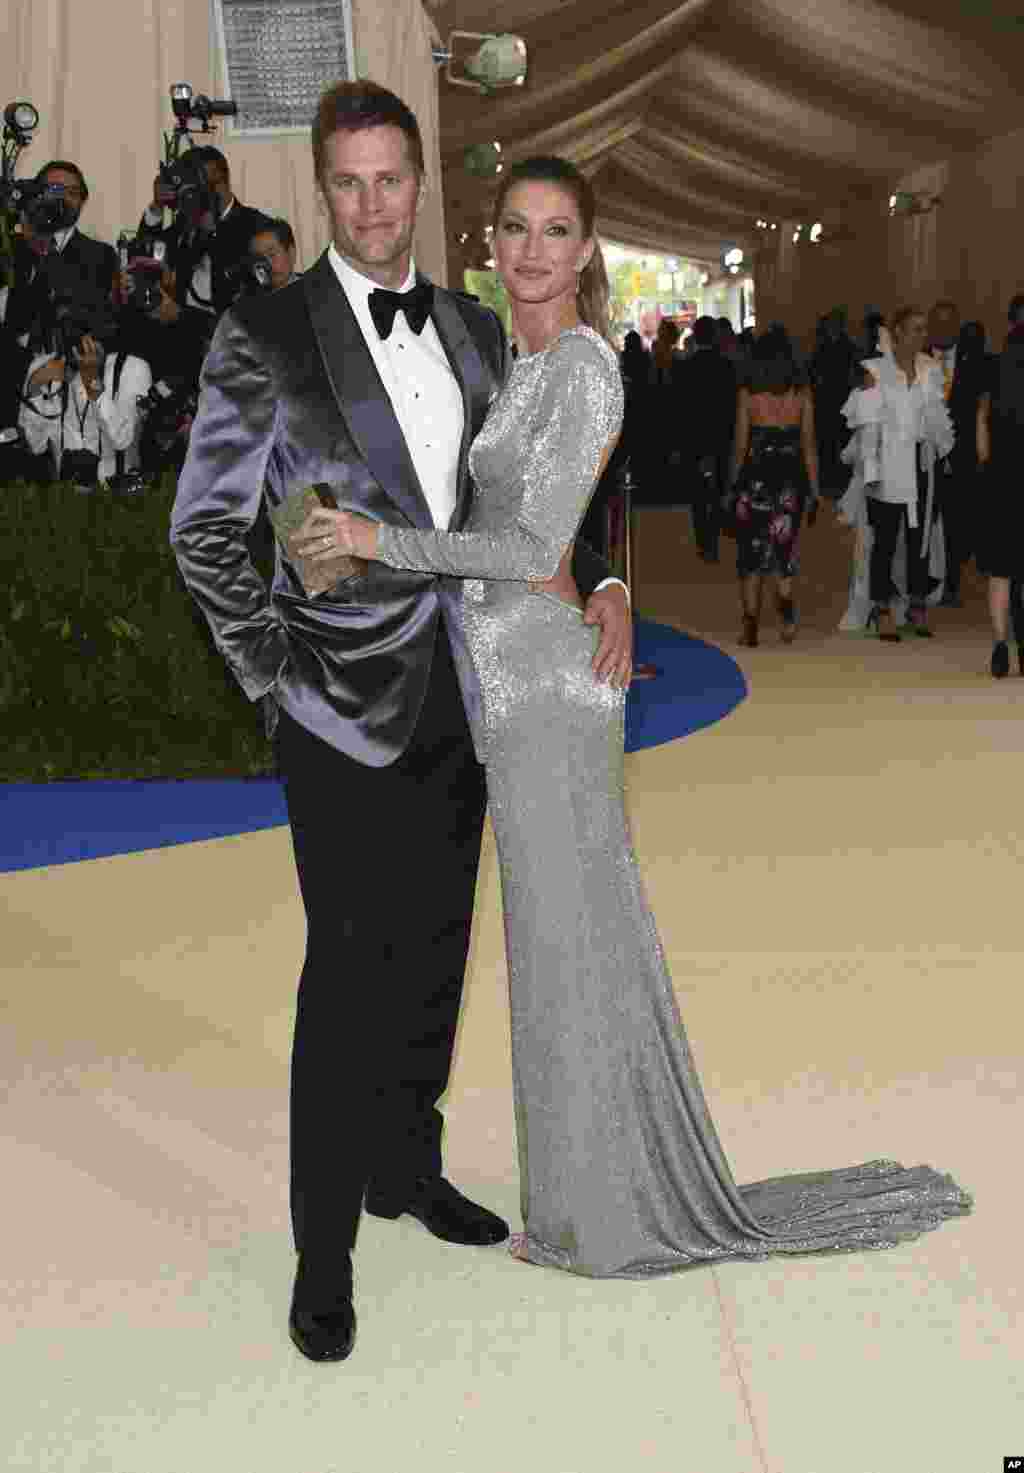 Tom Brady, left, and Gisele Bundchen attend The Metropolitan Museum of Art's Costume Institute benefit gala celebrating the opening of the Rei Kawakubo/Comme des Garçons: Art of the In-Between exhibition on May 1, 2017, in New York. 